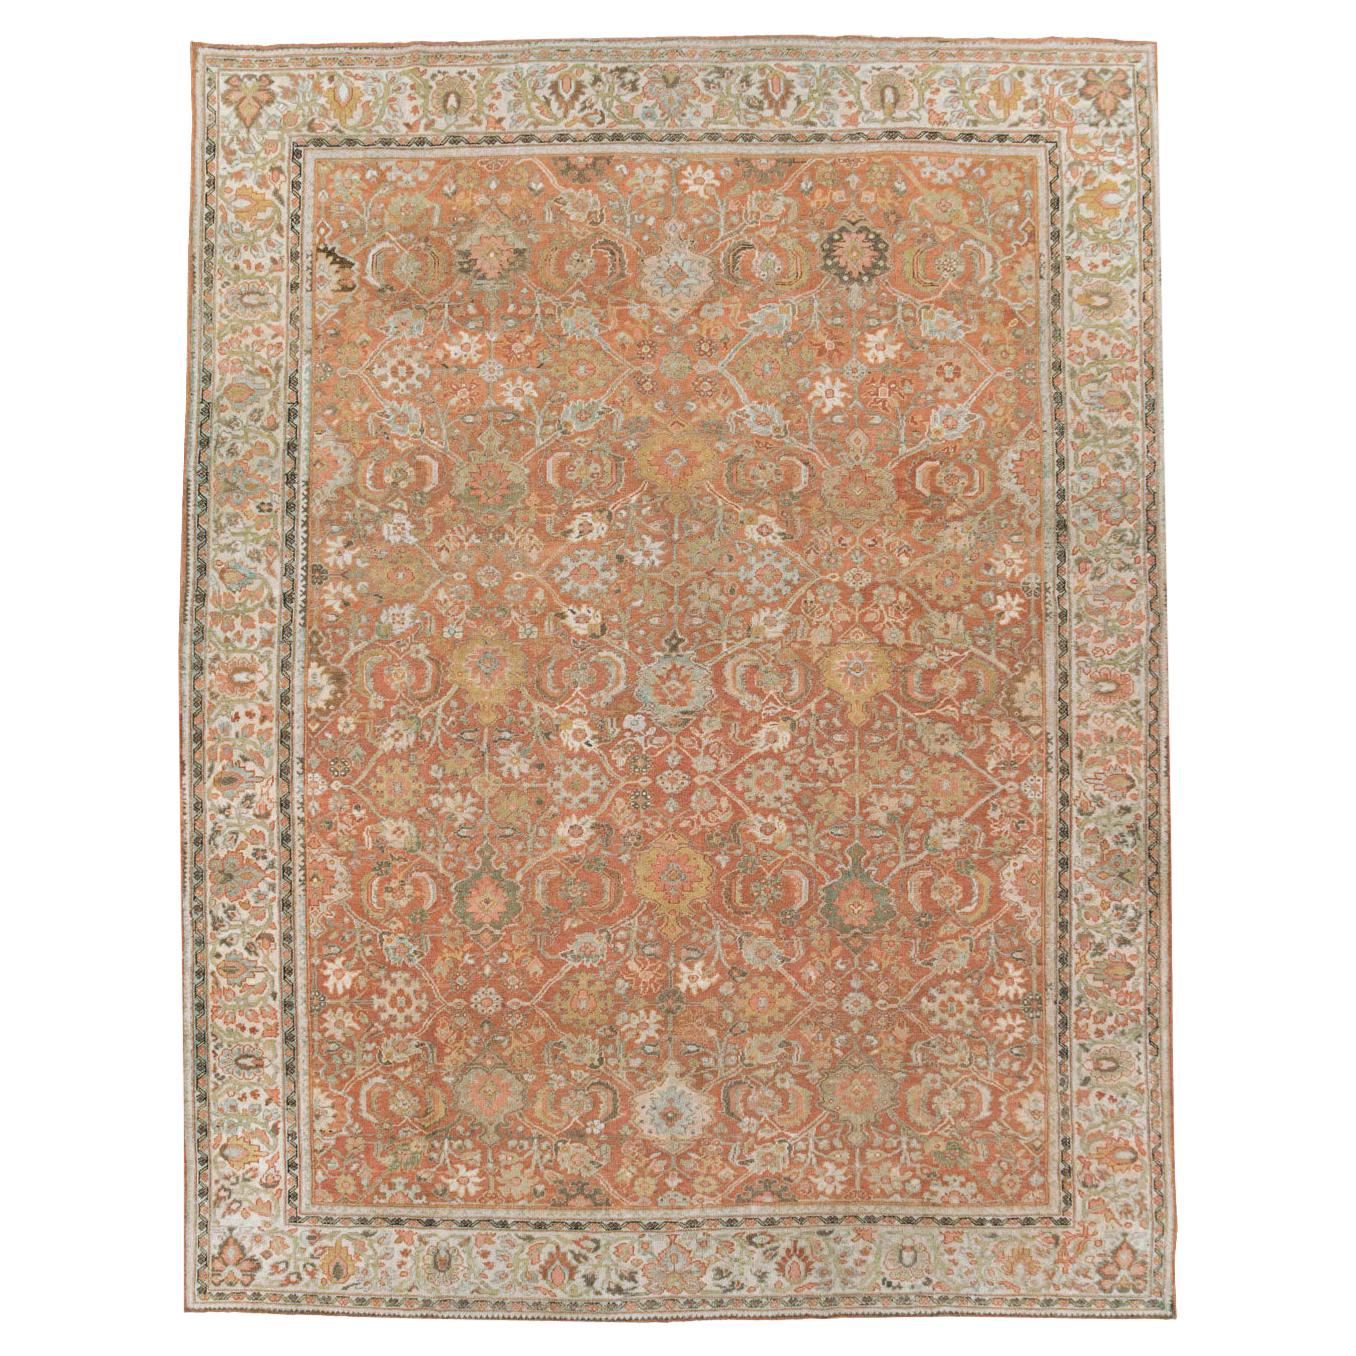 Early 20th Century Handmade Persian Mahal Room Size Carpet For Sale